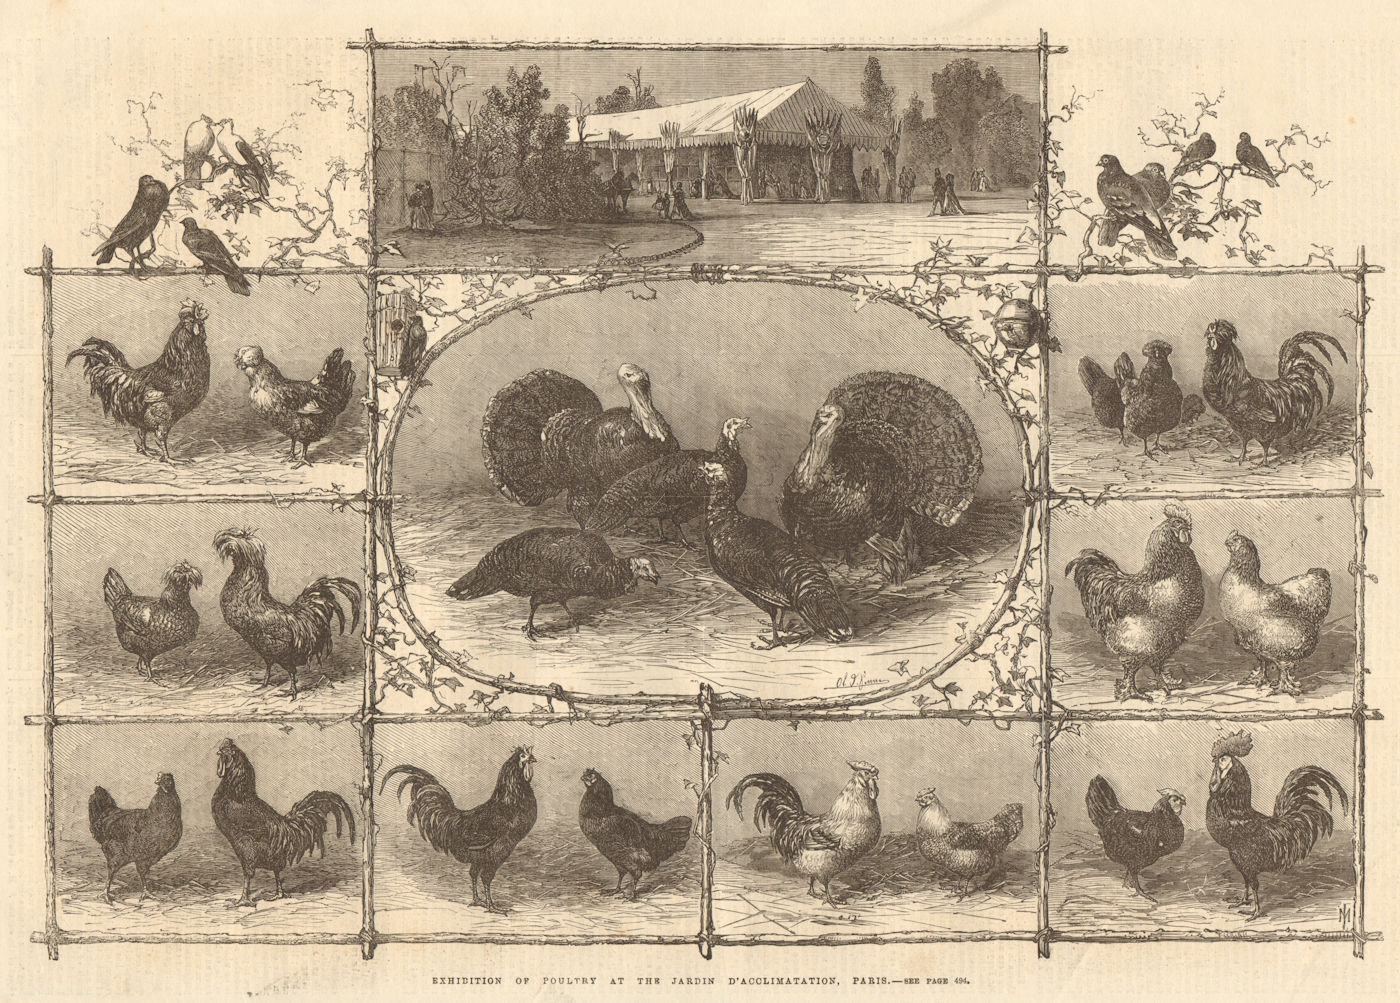 Exhibition of poultry at the Jardin d'Acclimatation, Paris 1868 ILN full page